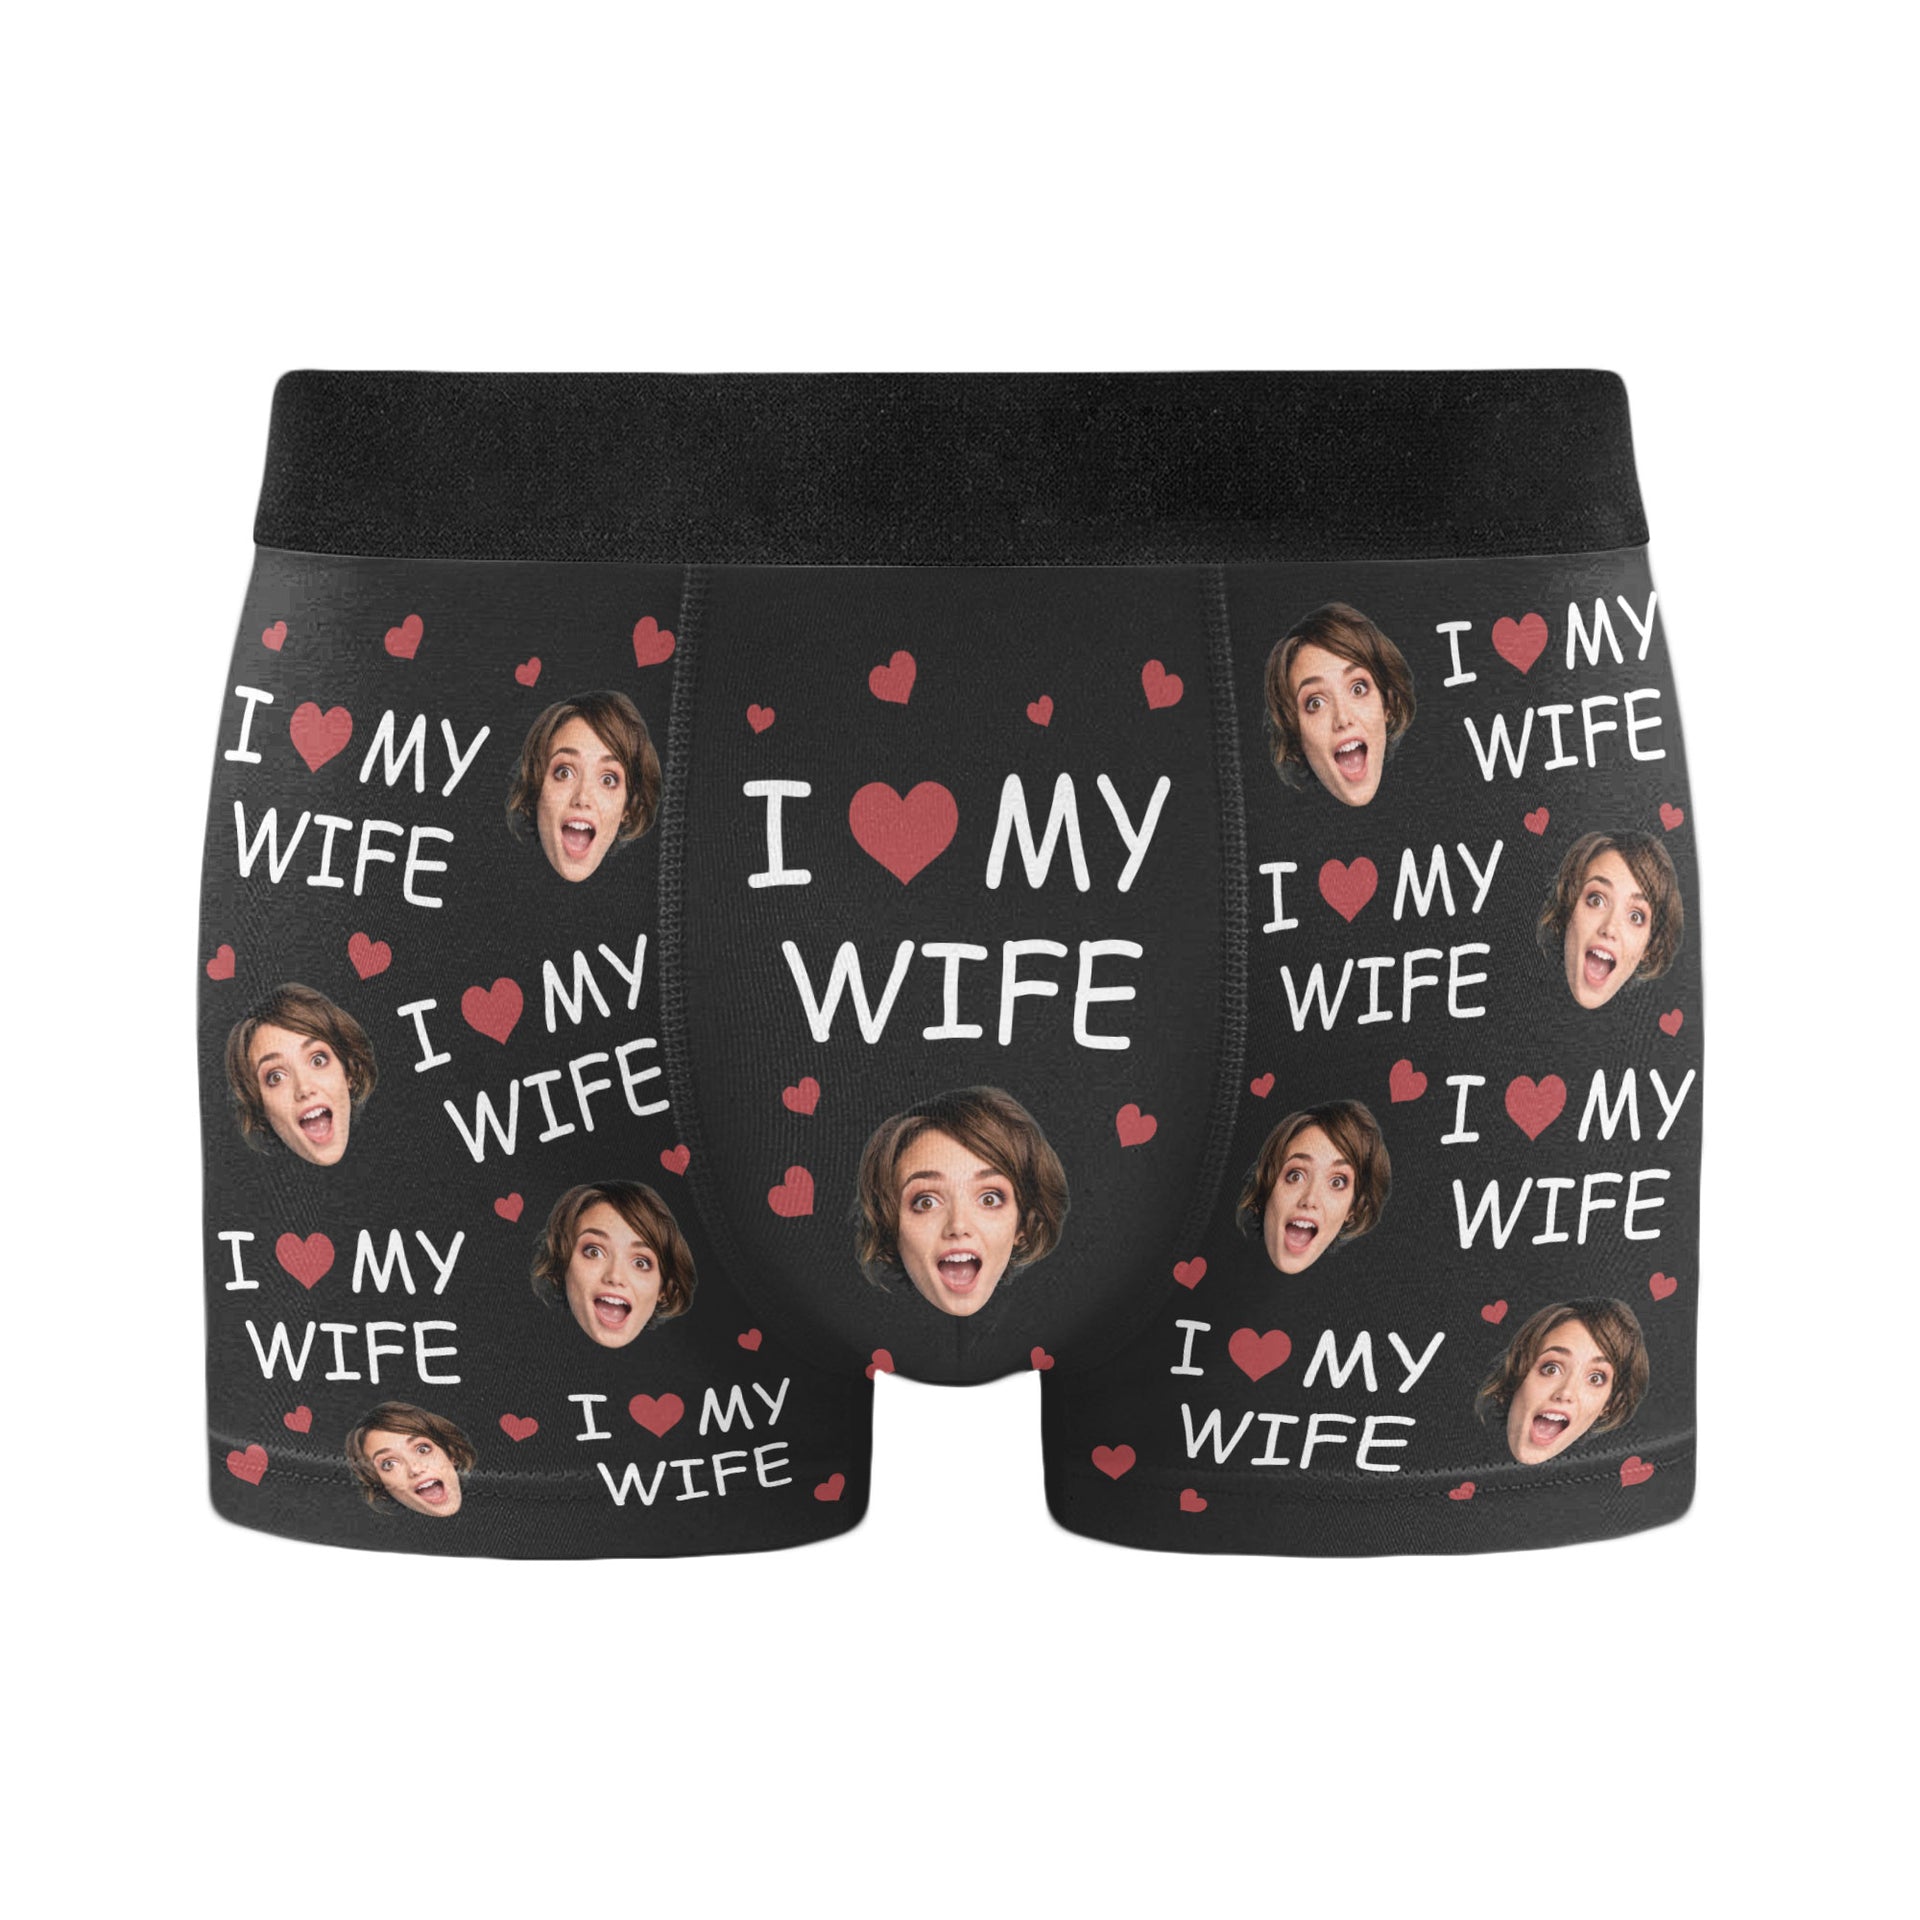 I Love My Wife - Personalized Photo Men's Boxer Briefs - Anniversary Gifts  For Men, Husband, Him